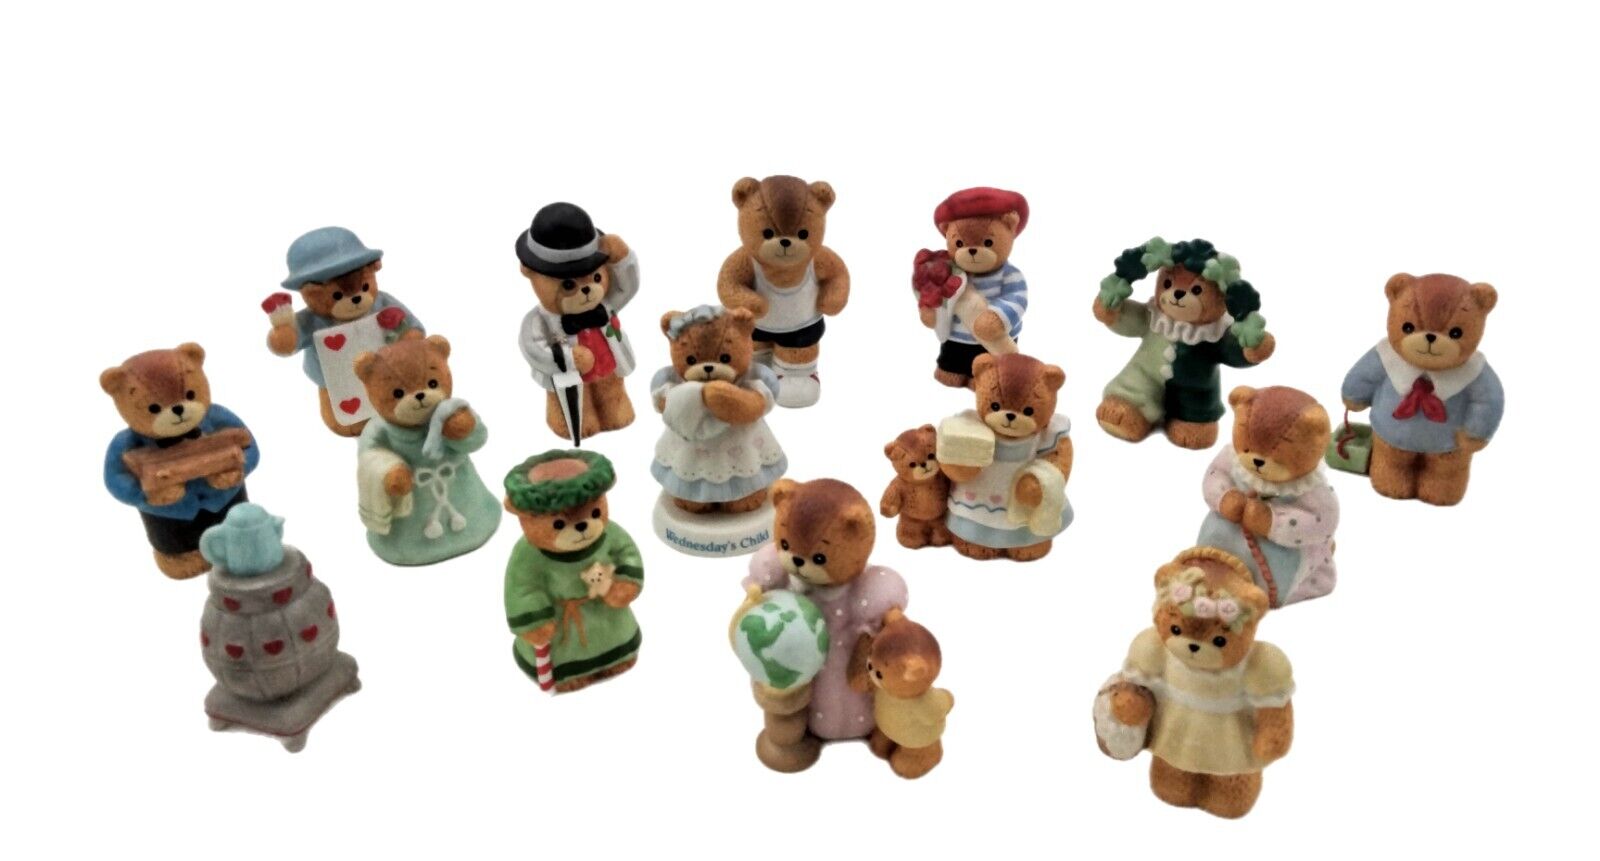 Lucy Rigg Enesco Teddy Bear Figurines Assorted Lot Of 15 Ceramic Vintage 1985 87